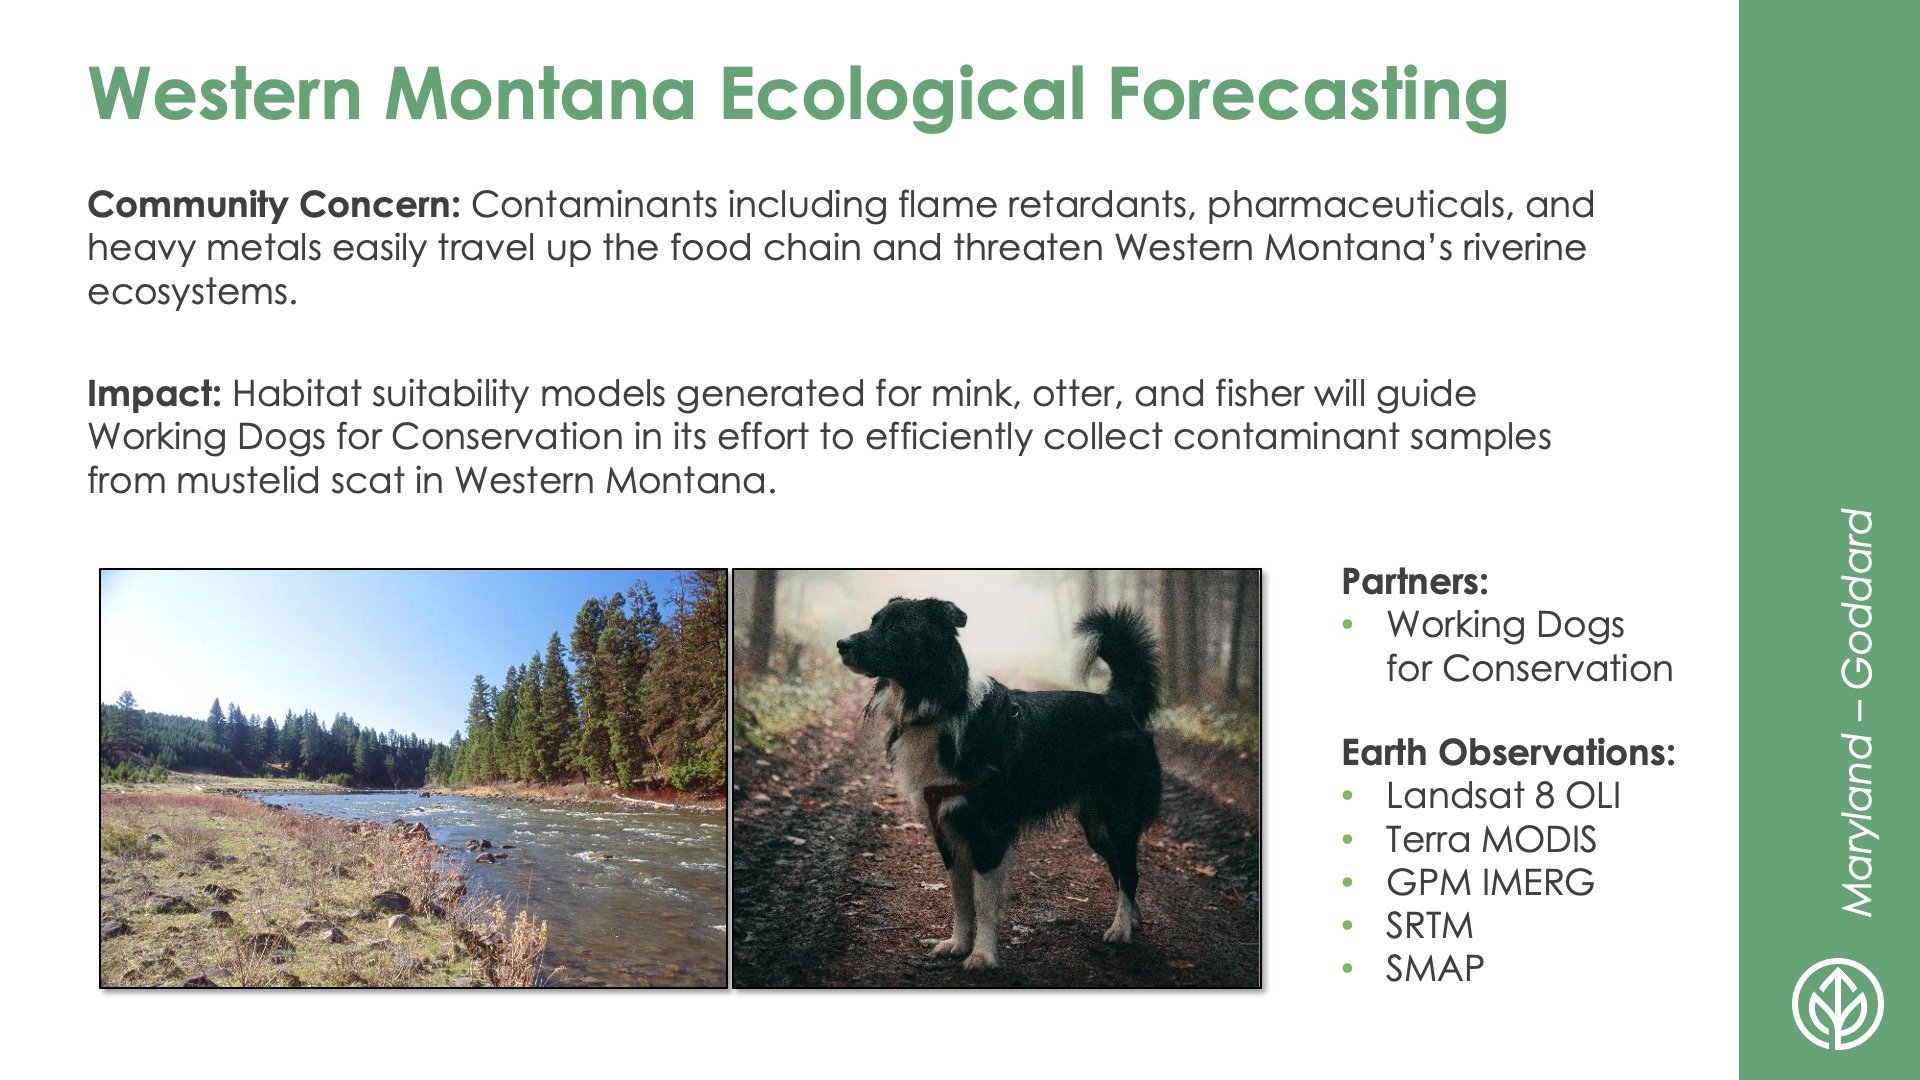 Slide title: Western Montana Ecological ForecastingDEVELOP Node: Maryland - GoddardCommunity Concern: Contaminants including flame retardants, pharmaceuticals, and heavy metals easily travel up the food chain and threaten Western Montana’s riverine ecosystems.Impact: Habitat suitability models generated for mink, otter, and fisher will guide Working Dogs for Conservation in its effort to efficiently collect contaminant samples from mustelid scat in Western Montana.Partners: Working Dogs for ConservationEarth Observations: Landsat 8 OLI, Terra MODIS. GPM IMERG. SRTM, SMAP